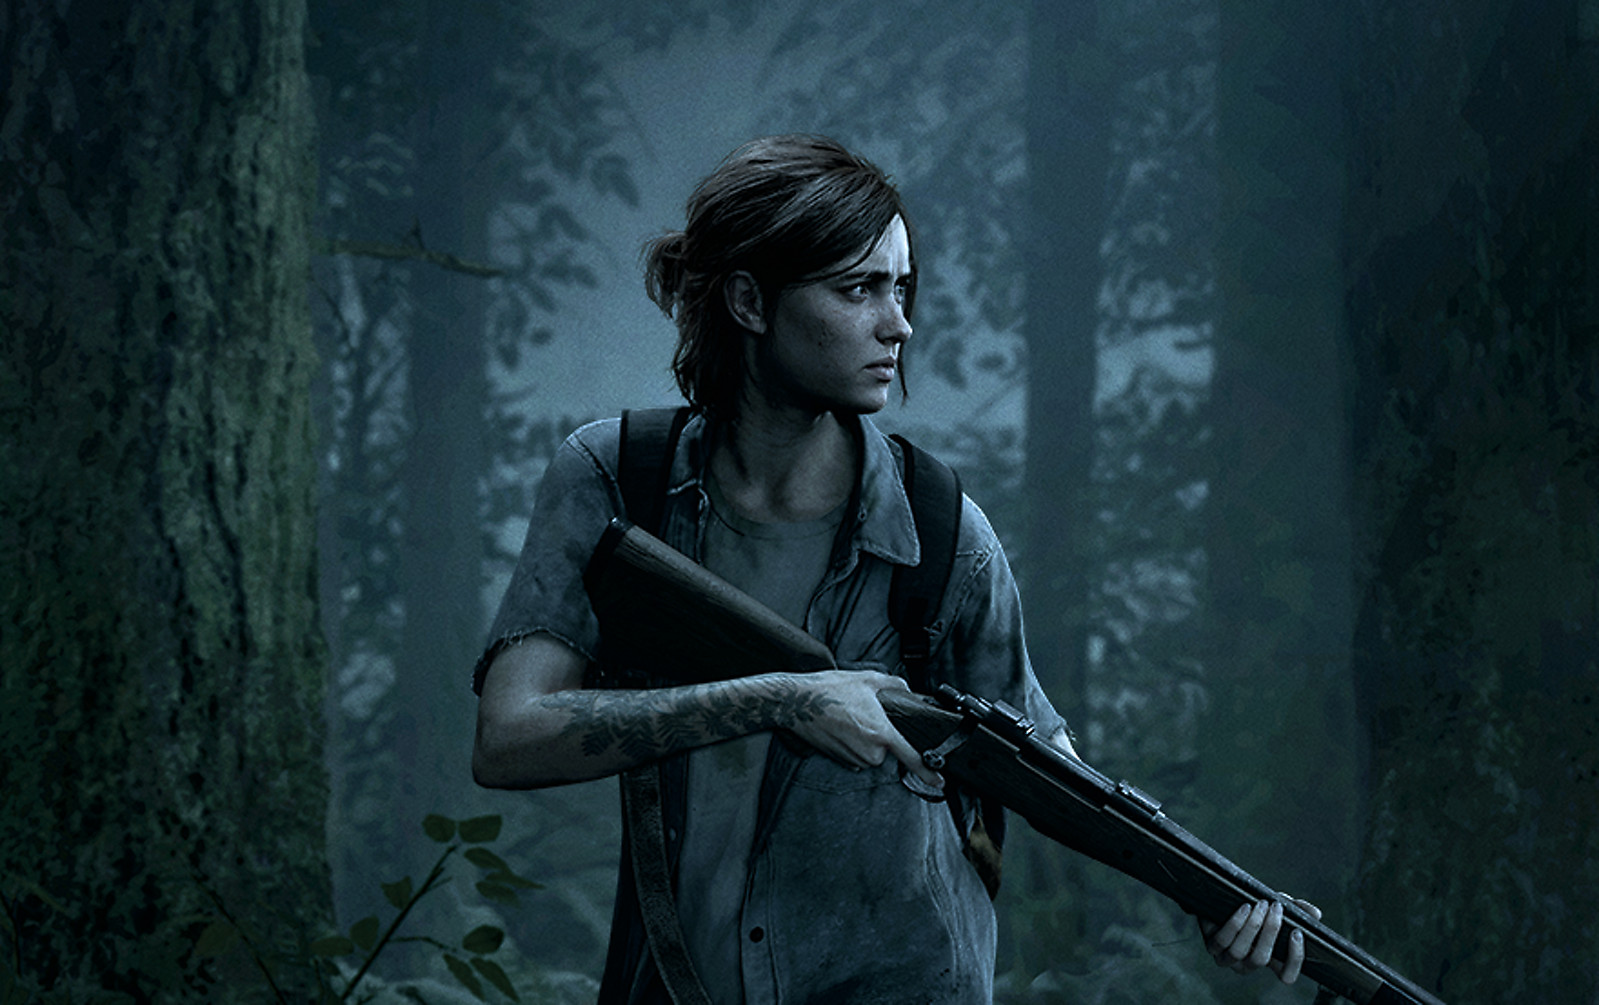 https://media.playstation.com/is/image/SCEA/the-last-of-us-background-blue-forest-03-ps4-en-us-08jul20?$native_xl_nt$